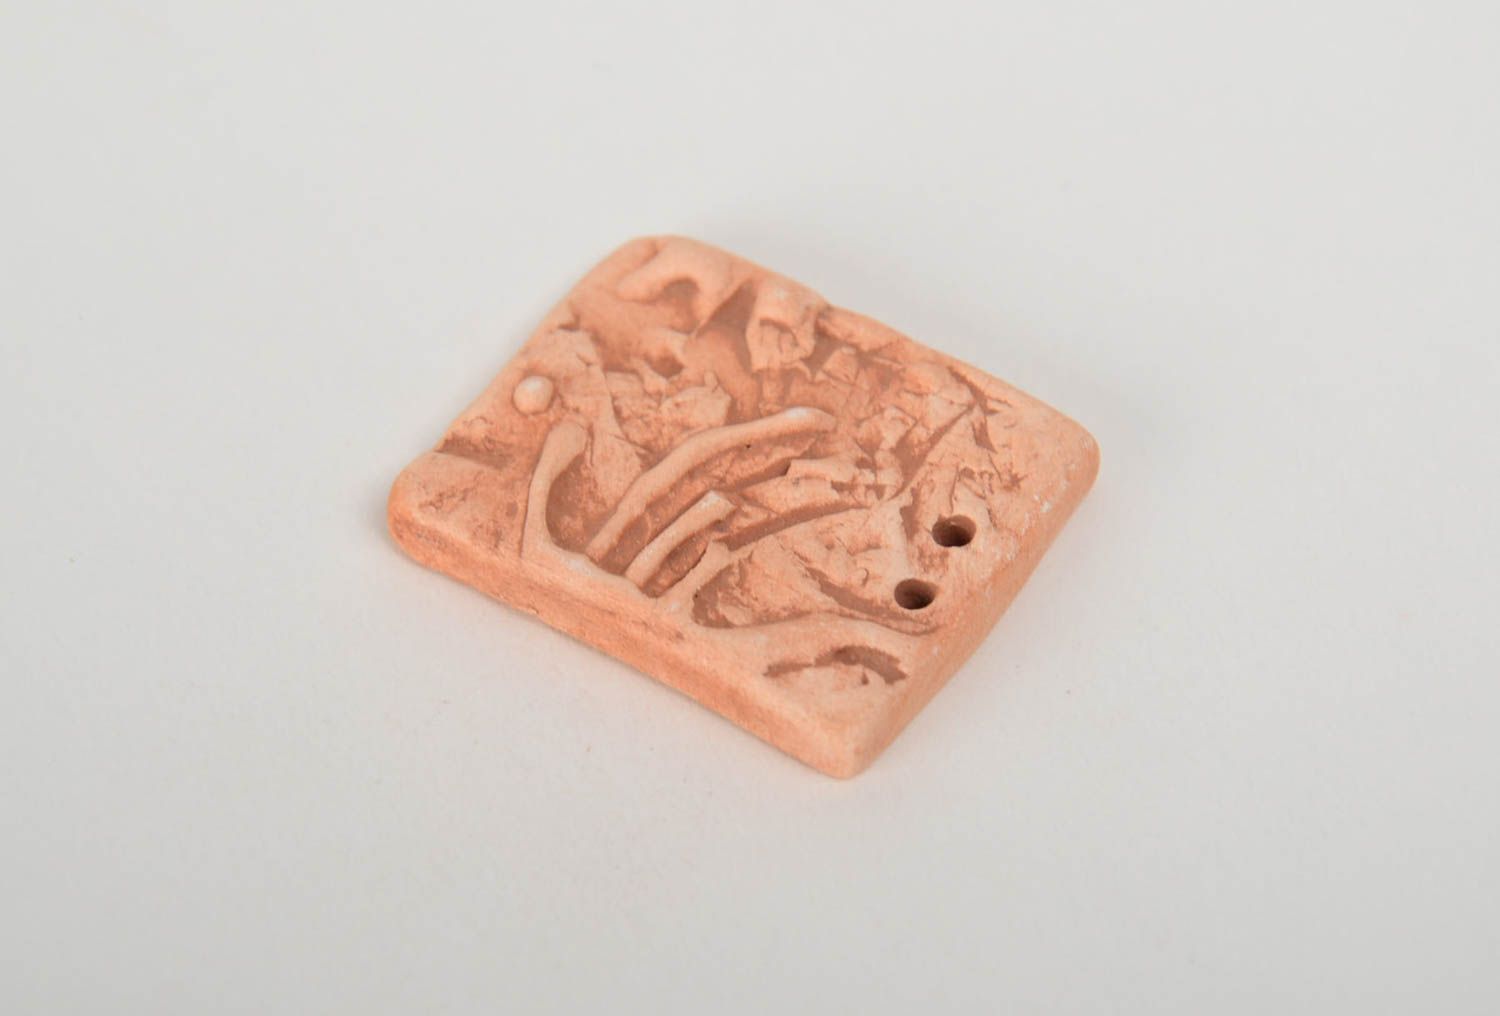 Homemade relief flat ceramic decoration for jewelry making pendant without cord photo 4